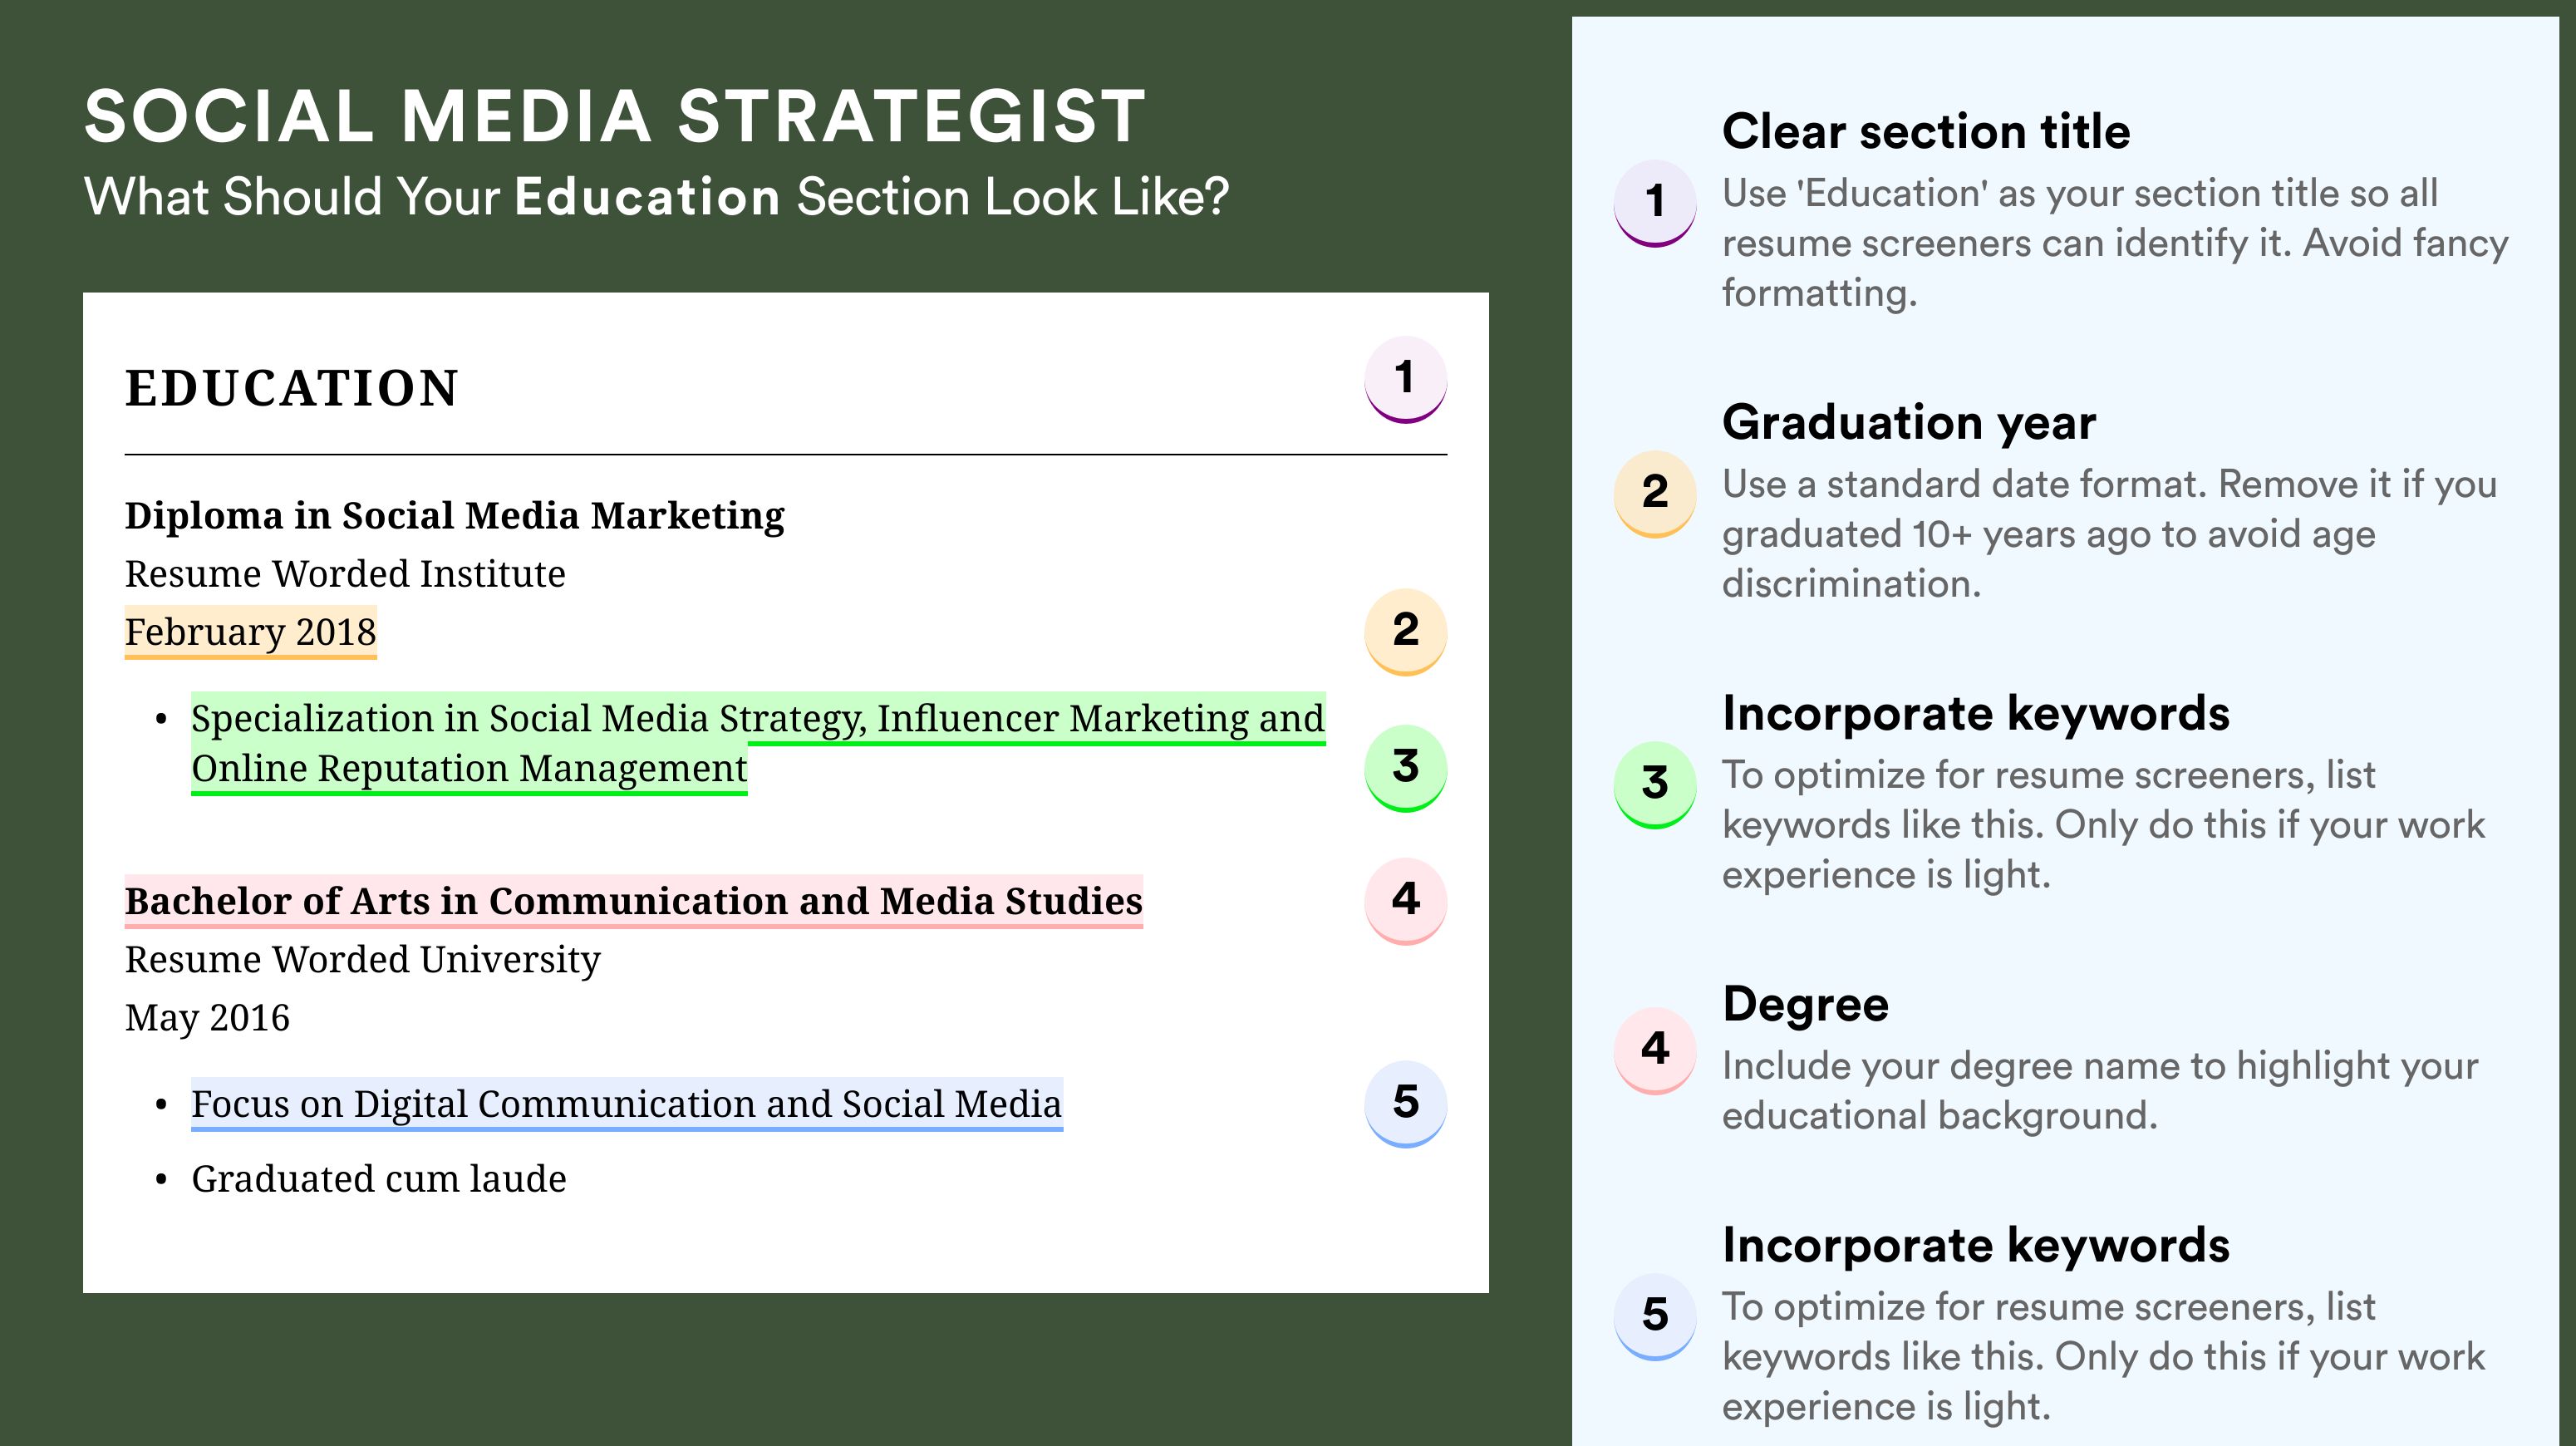 How To Write An Education Section - Social Media Strategist Roles